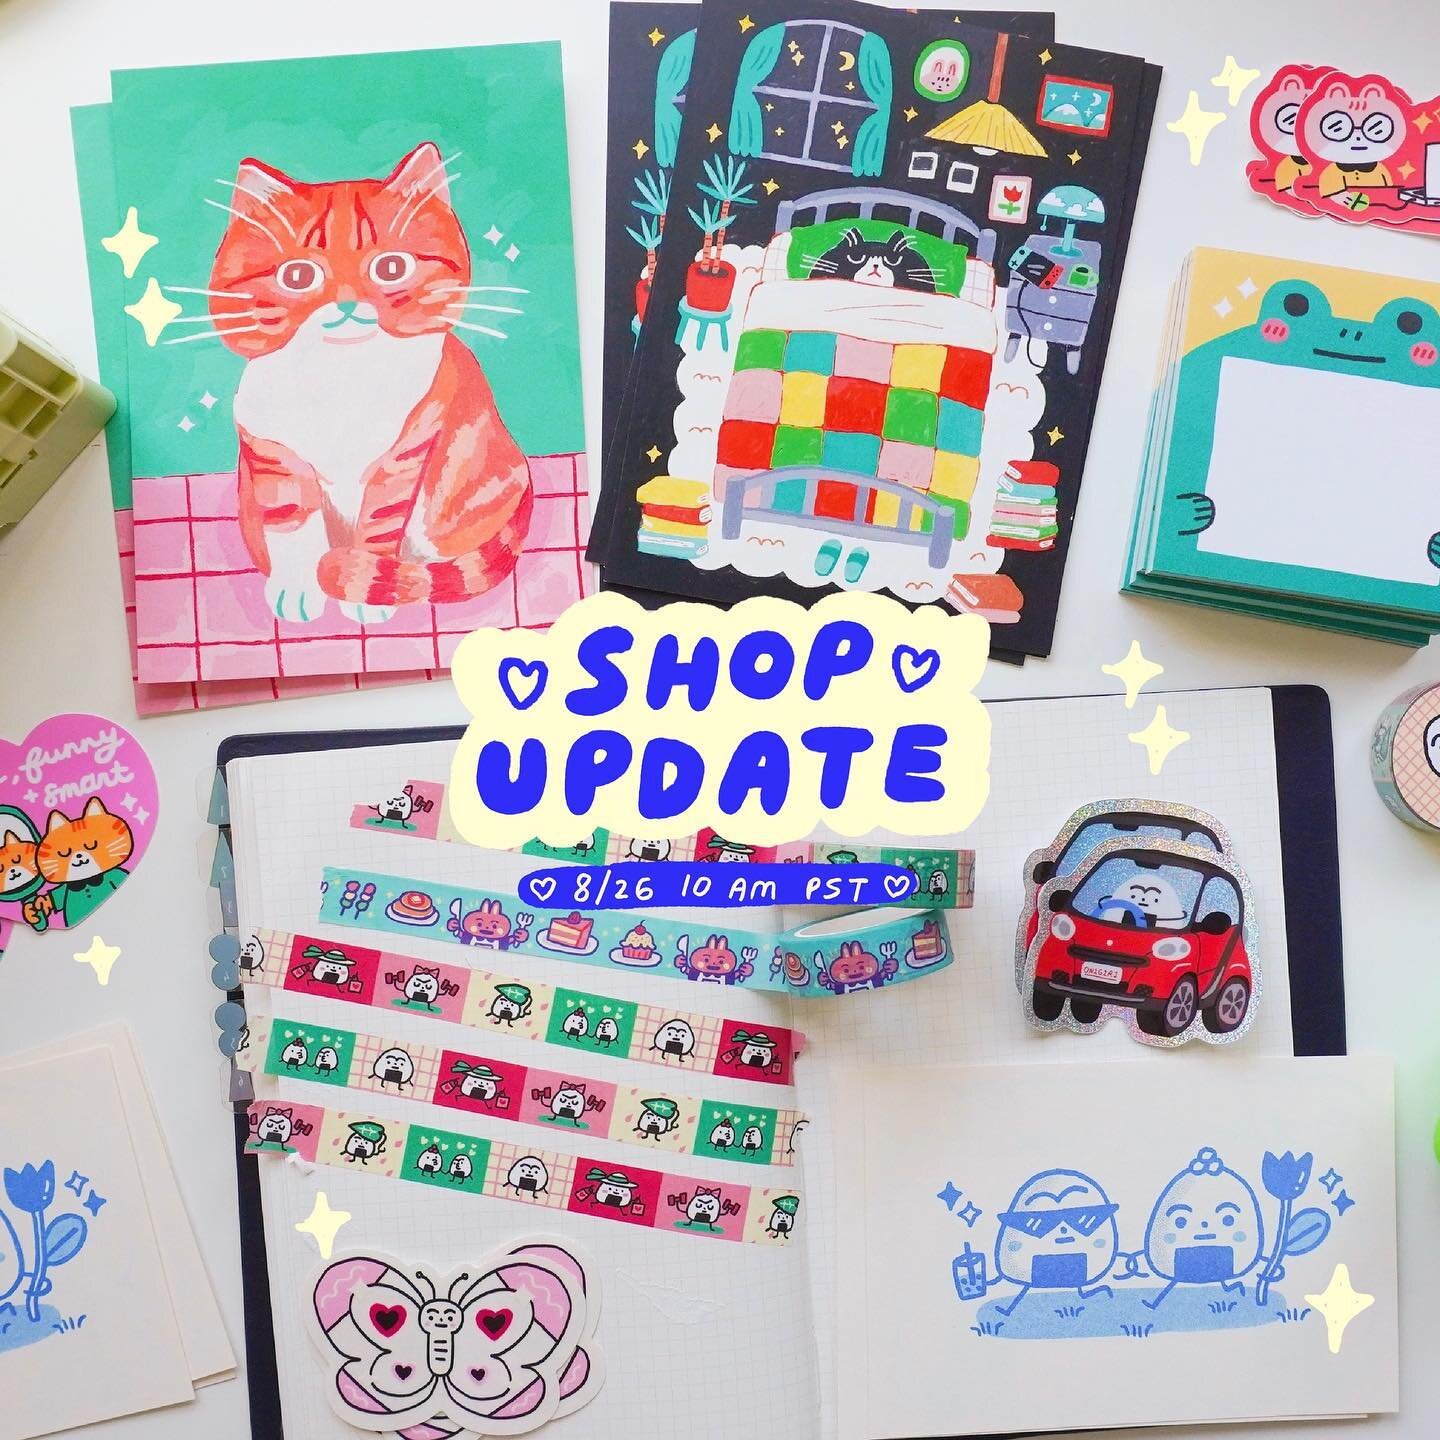 🍙 SHOP UPDATE ALERT!! 8/26 10 AM PST 🍙 

I&rsquo;m soooooo excited to share this new shop update!! I&rsquo;ve got a new t-shirt, a buuuunch of restocks (both tote bags are in), and loads of other new fun products like stickers and stationary stuff 